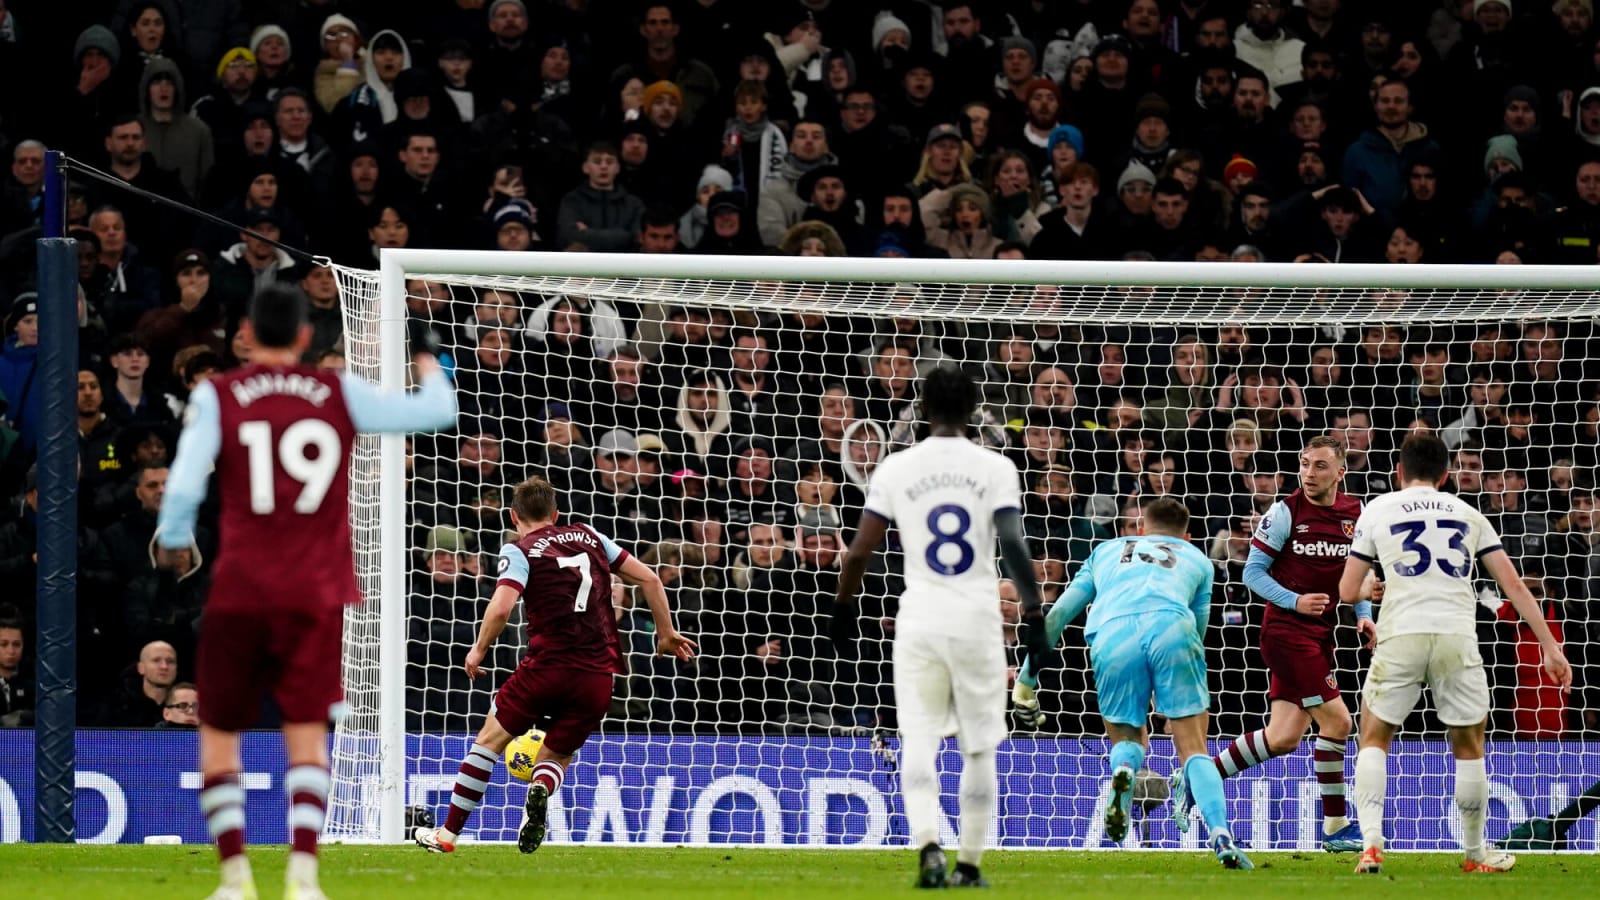 Watch: James Ward-Prowse gives West Ham the lead after defensive error